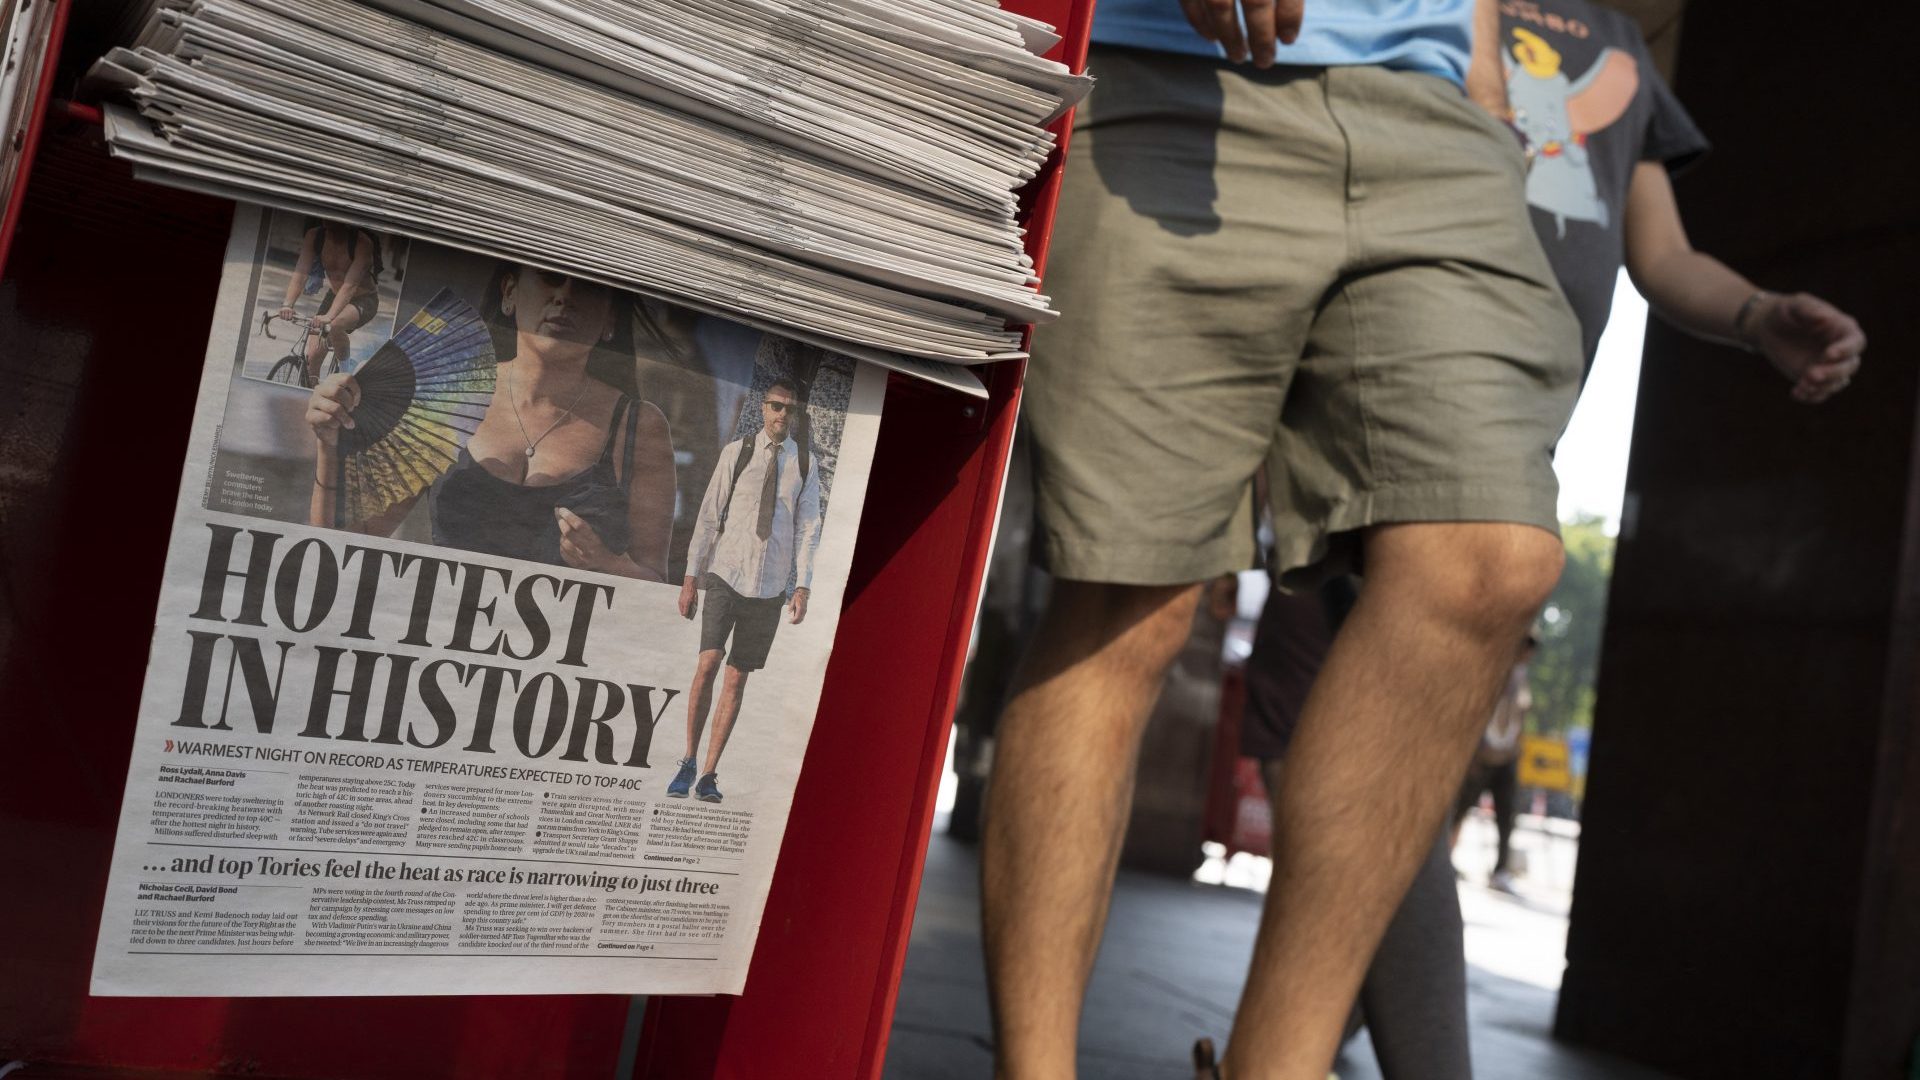 Copies of the Evening Standard at Victoria station reports on the hottest day in UK history (Photo by Richard Baker / In Pictures via Getty Images)